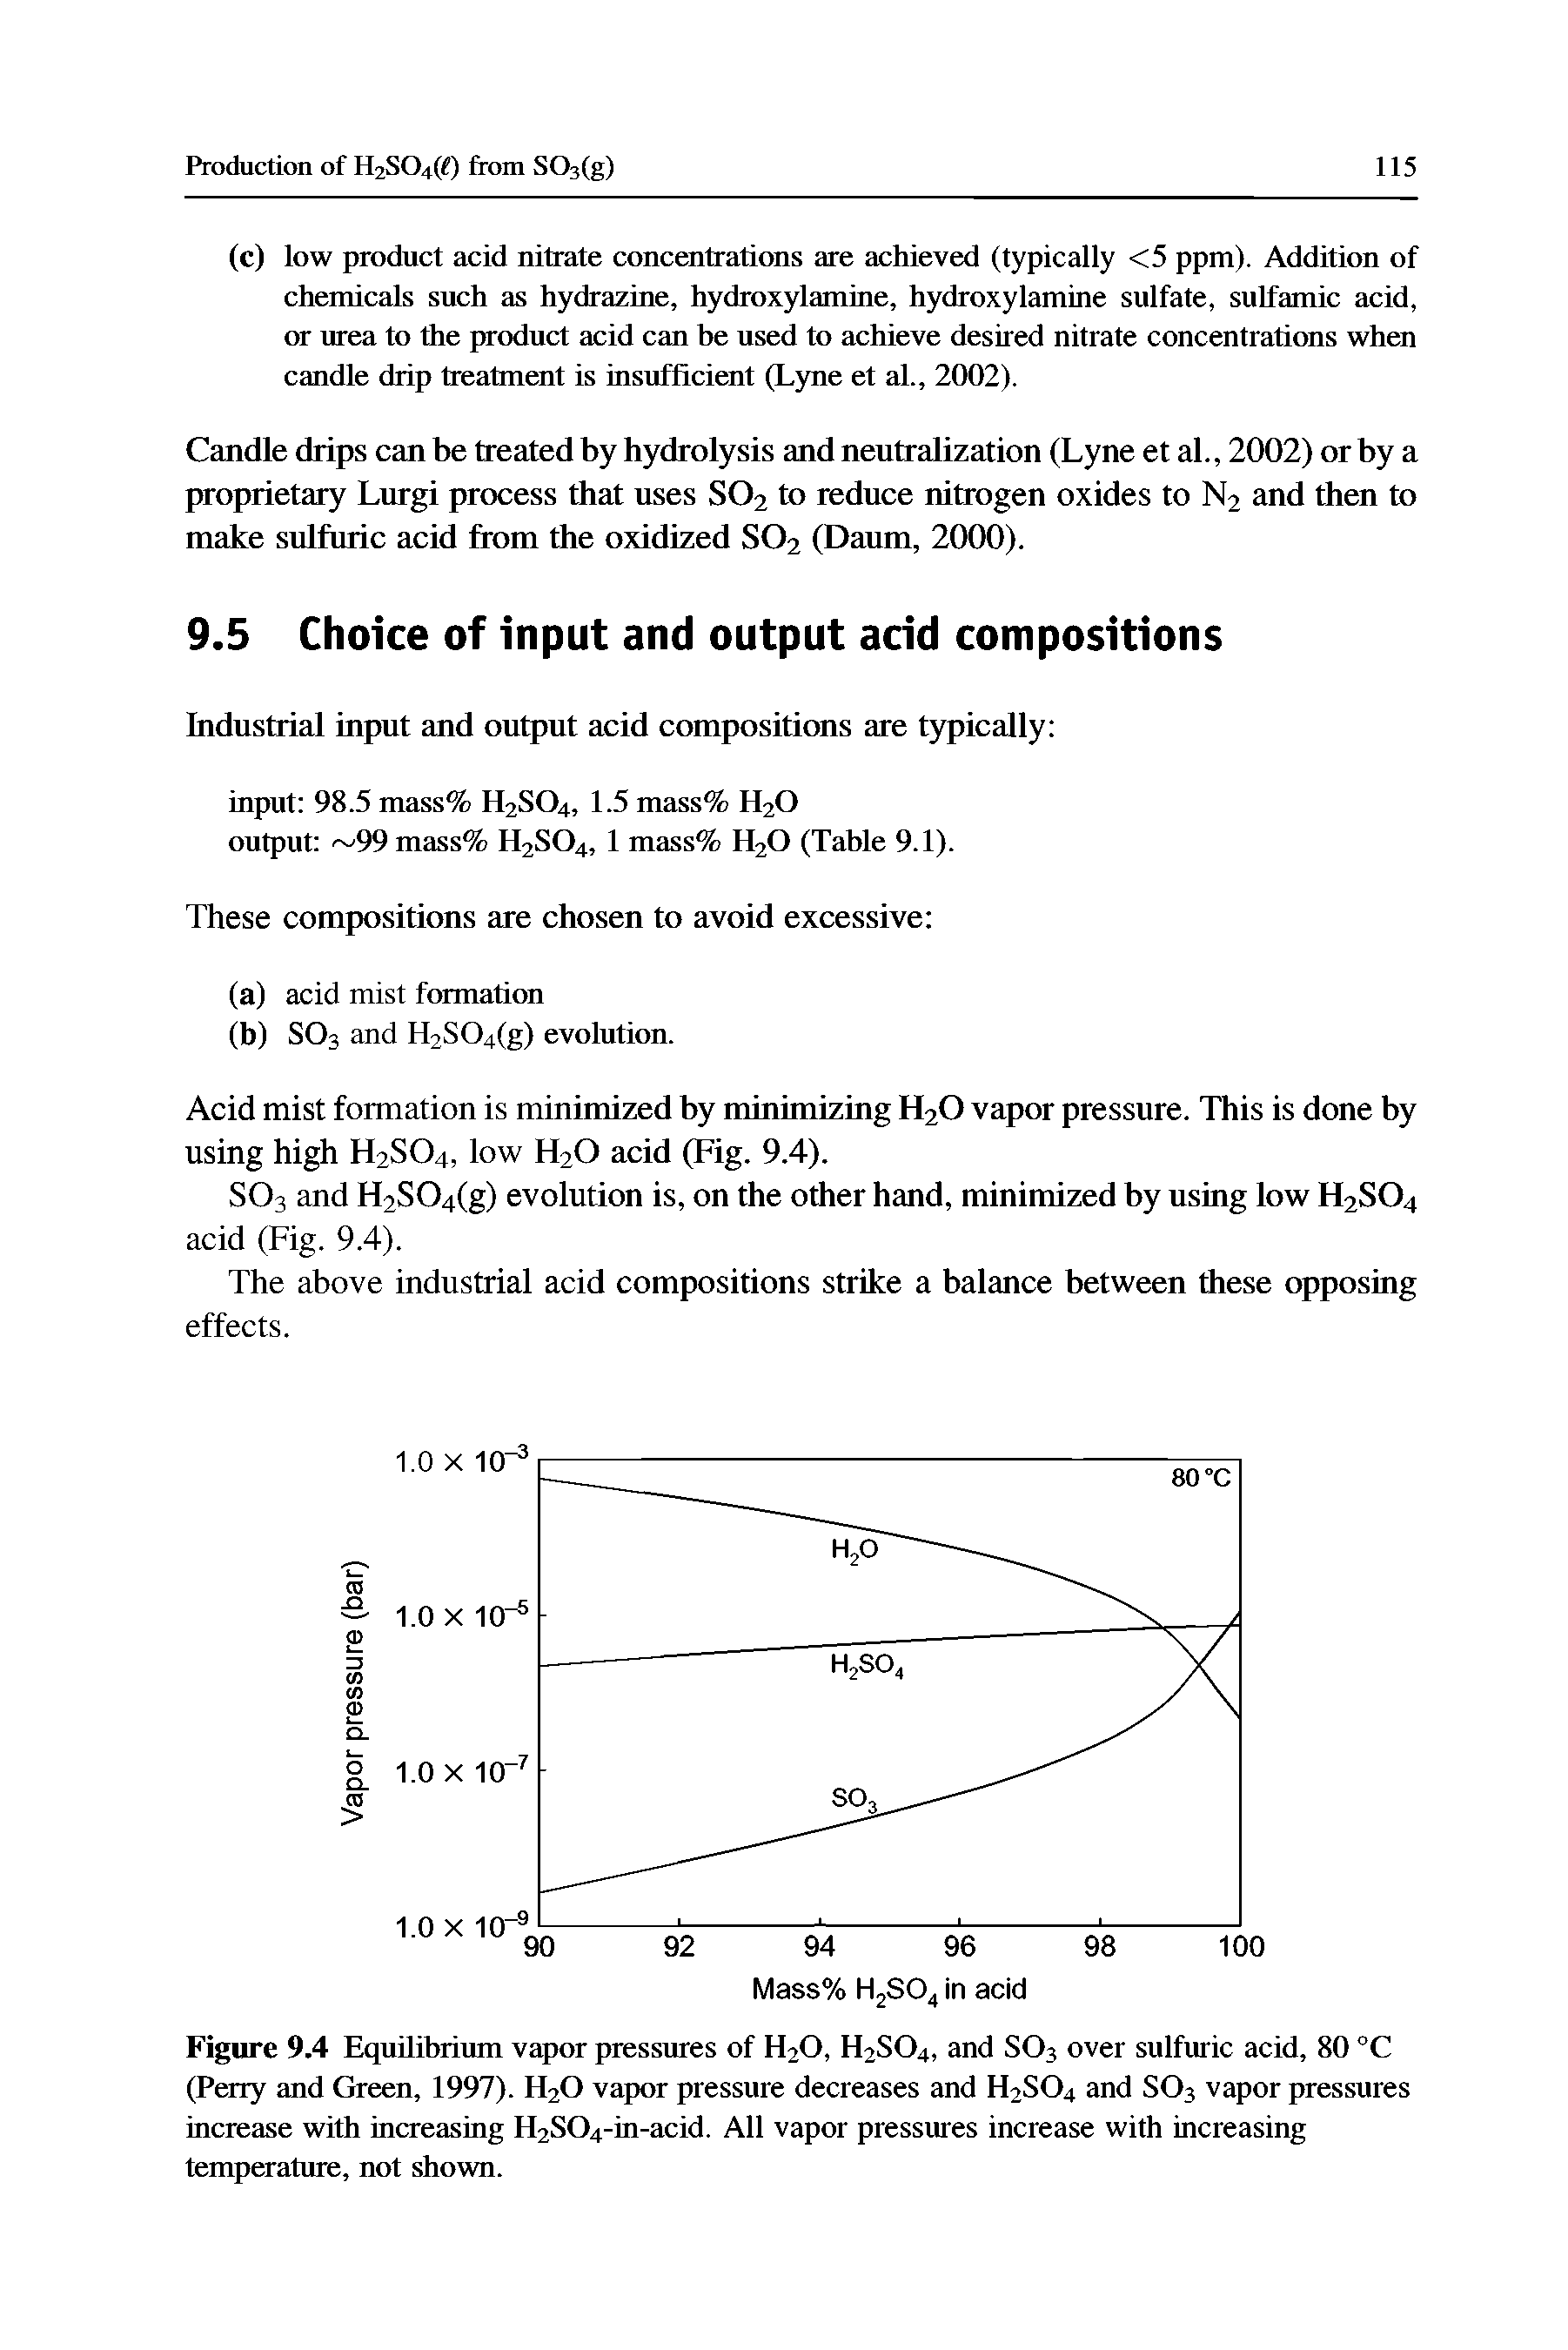 Figure 9.4 Equilibrium vapor pressures of H2O, H2SO4, and SO3 over sulfuric acid, 80 °C (Perry and Green, 1997). H2O vapor pressure decreases and H2SO4 and SO3 vapor pressures increase with increasing H2S04-in-acid. All vapor pressures increase with increasing temperature, not shown.